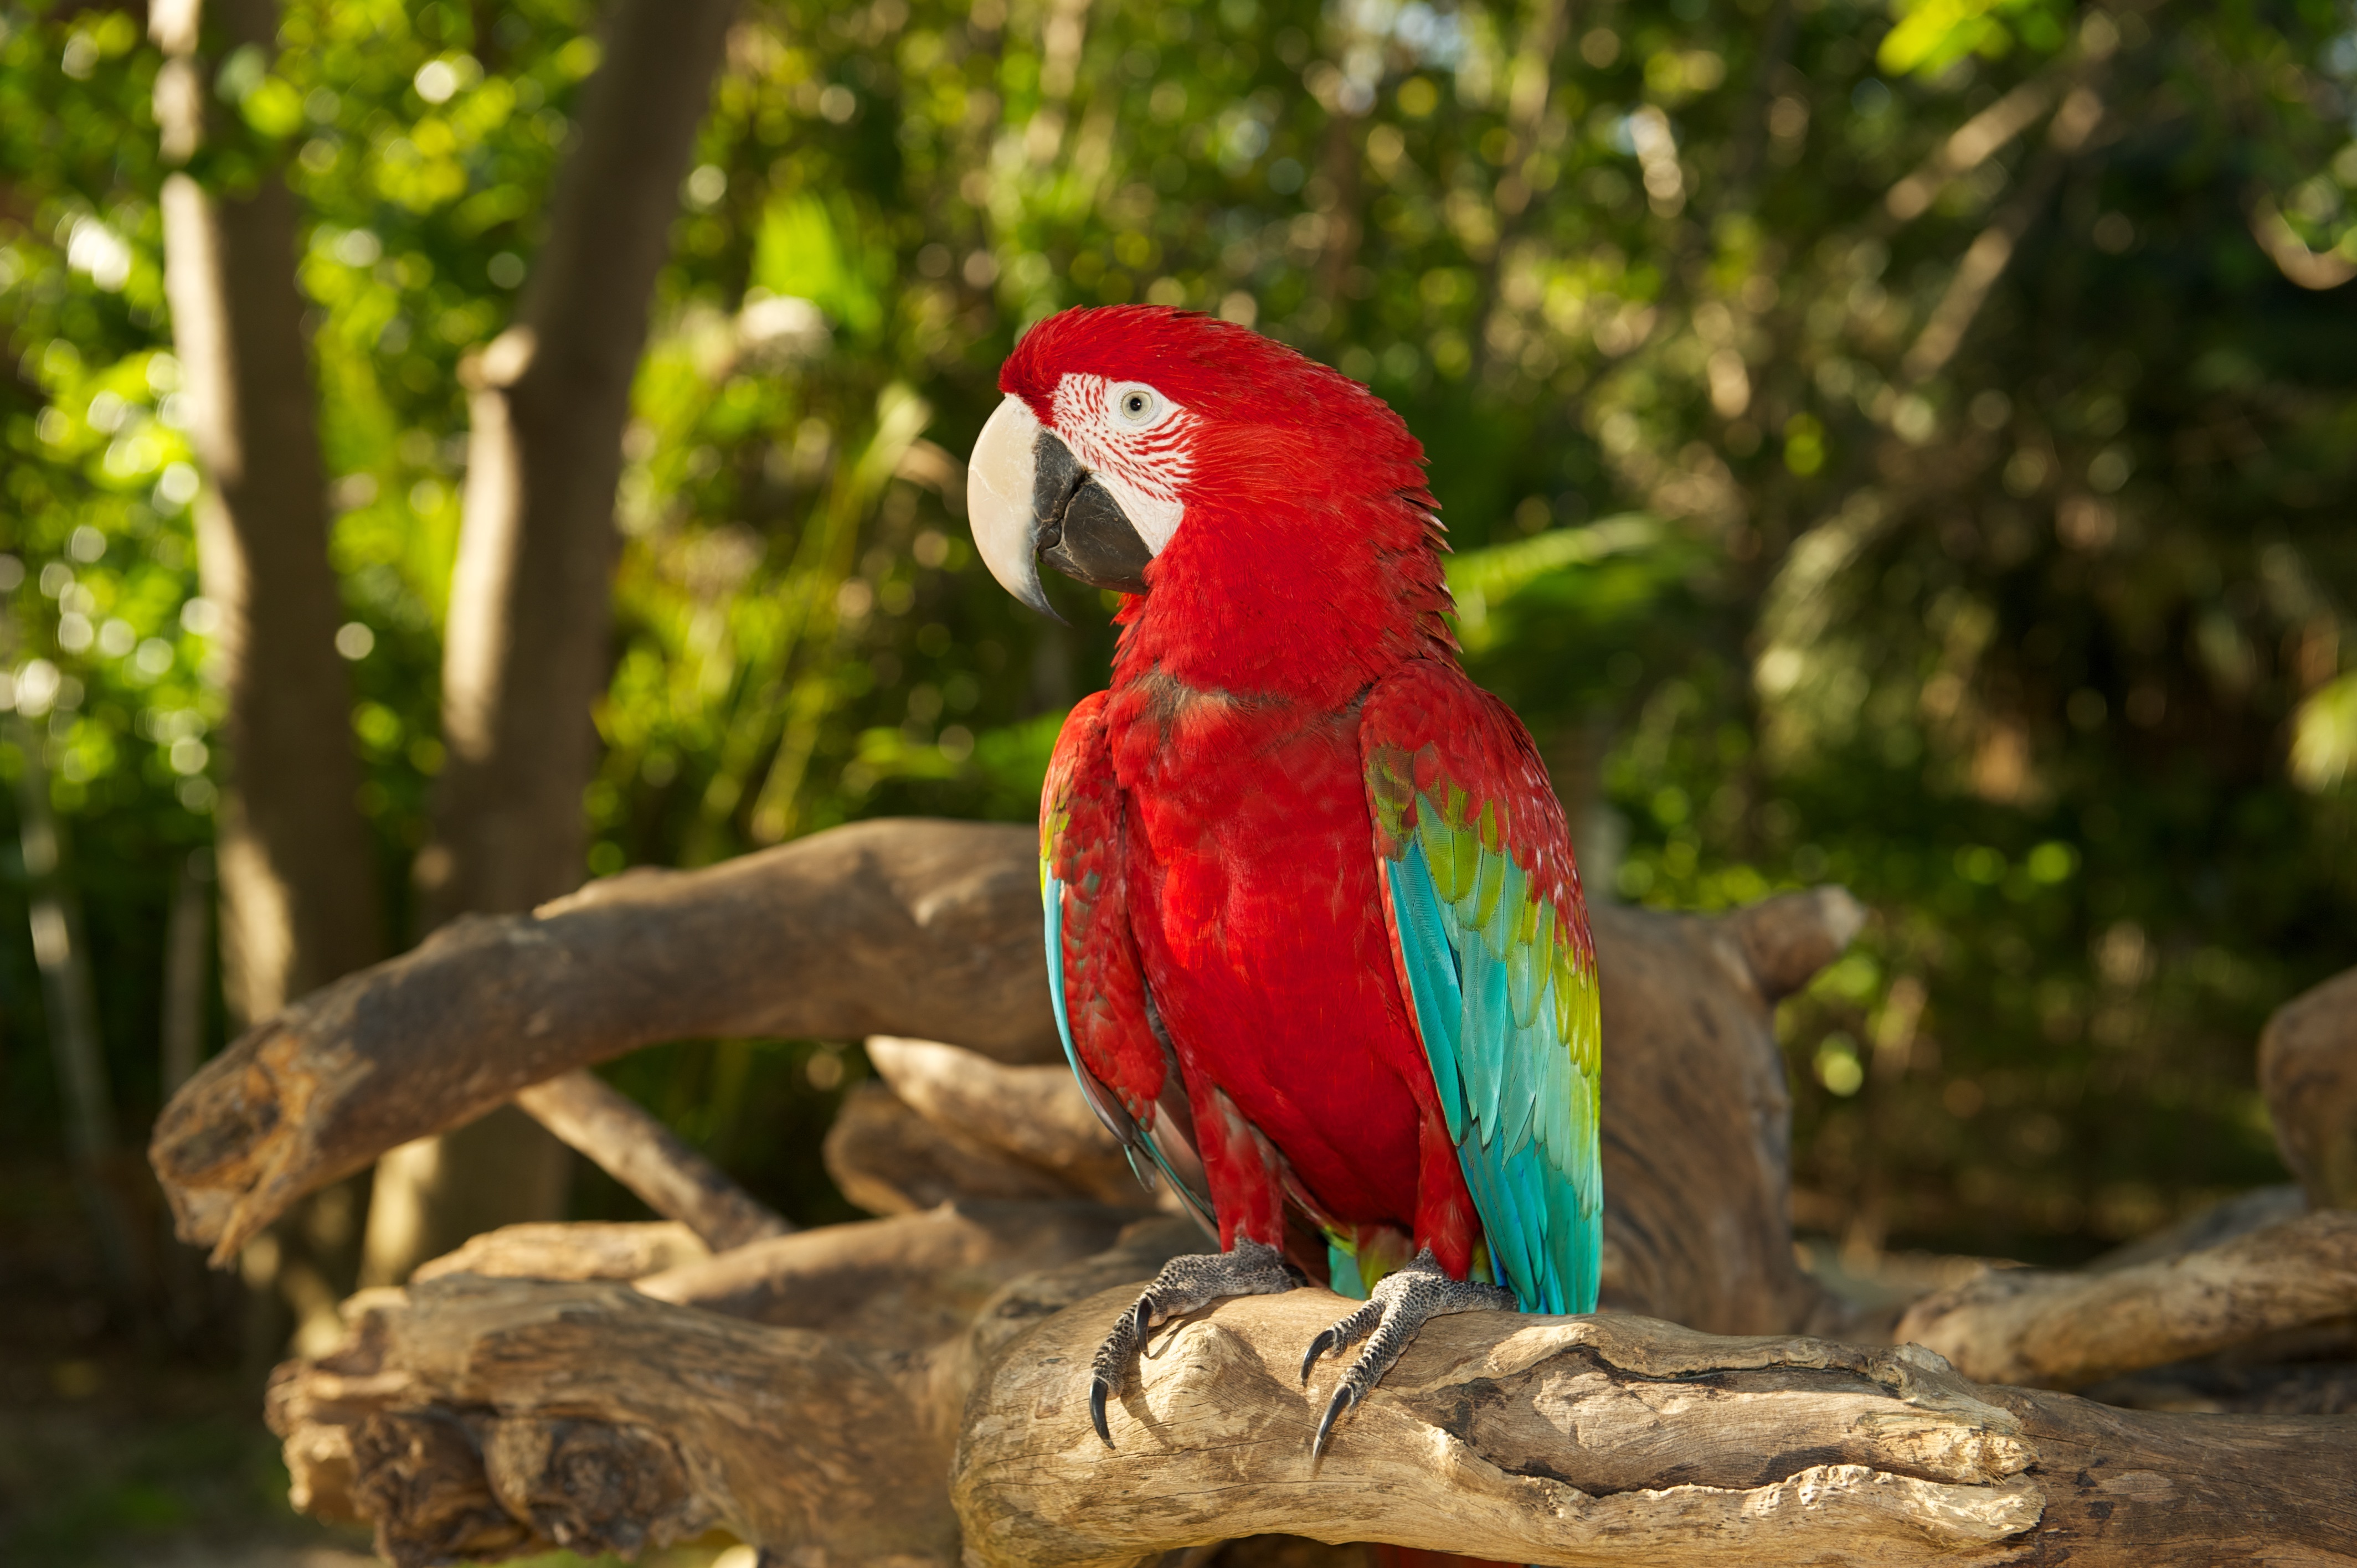 Bird Bokeh Macaw Parrot Red And Green Macaw 4256x2832